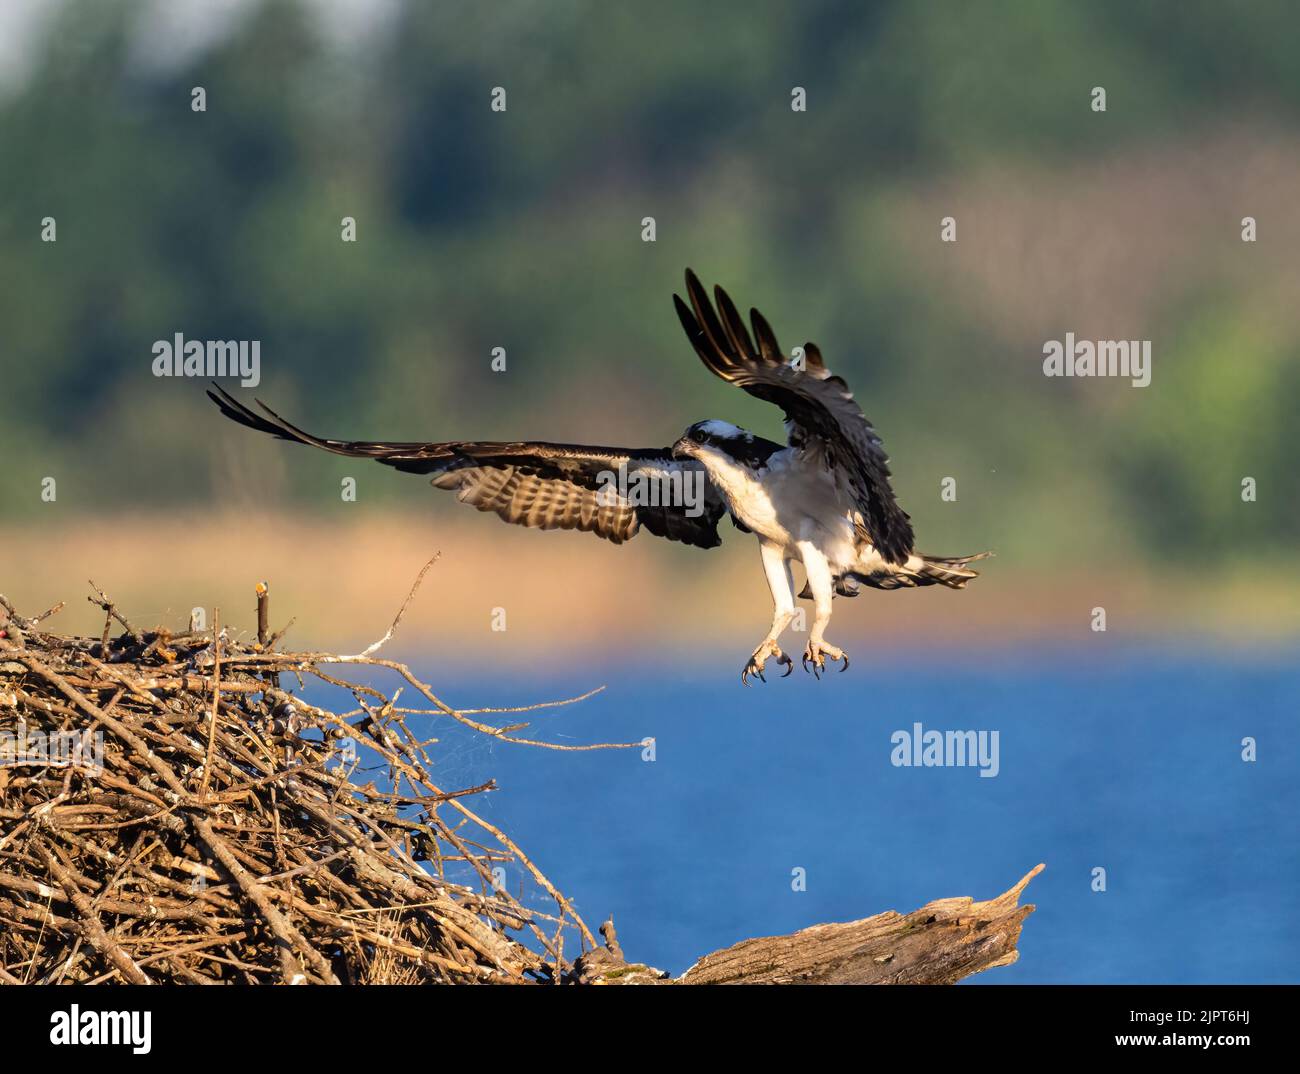 An osprey flying to the nest with spread wings, against a sea and trees background Stock Photo